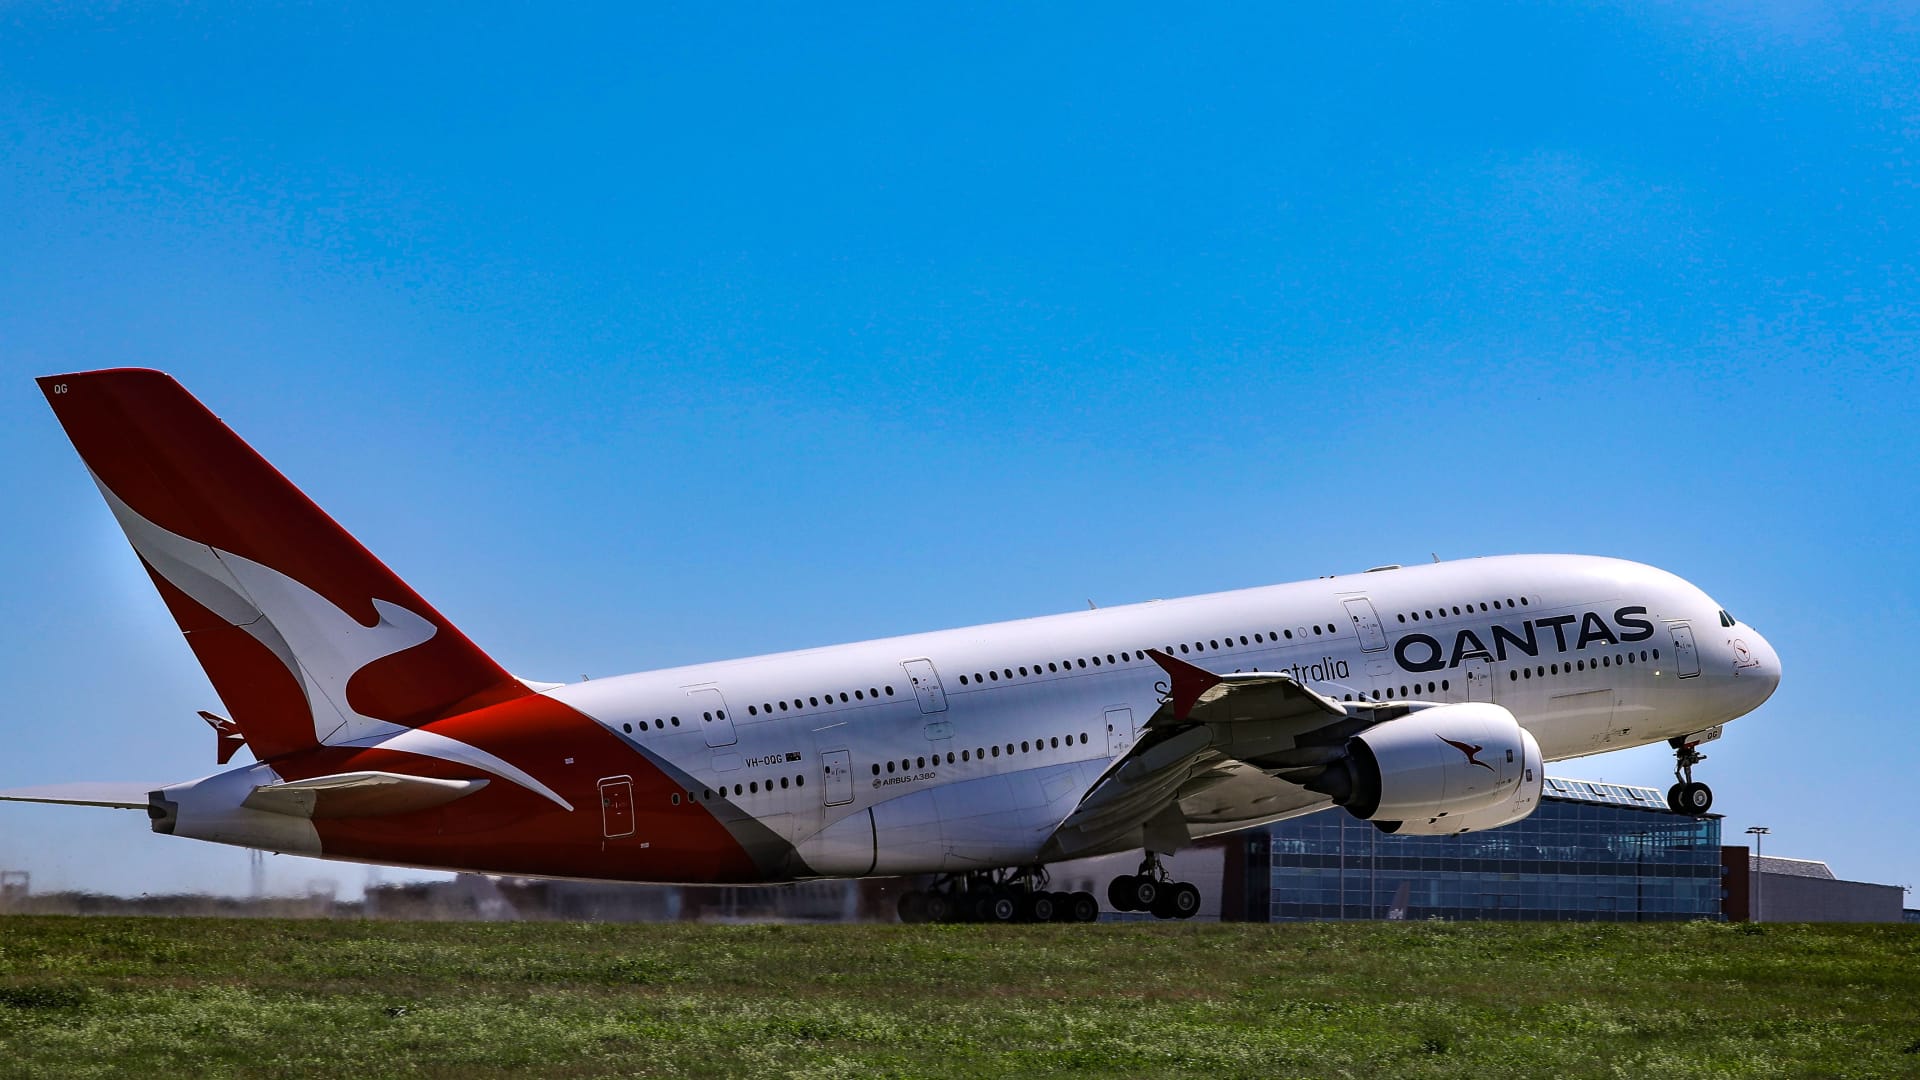 Qantas A380 taking off on runway in Saxony, Dresden on Aug. 21, 2020